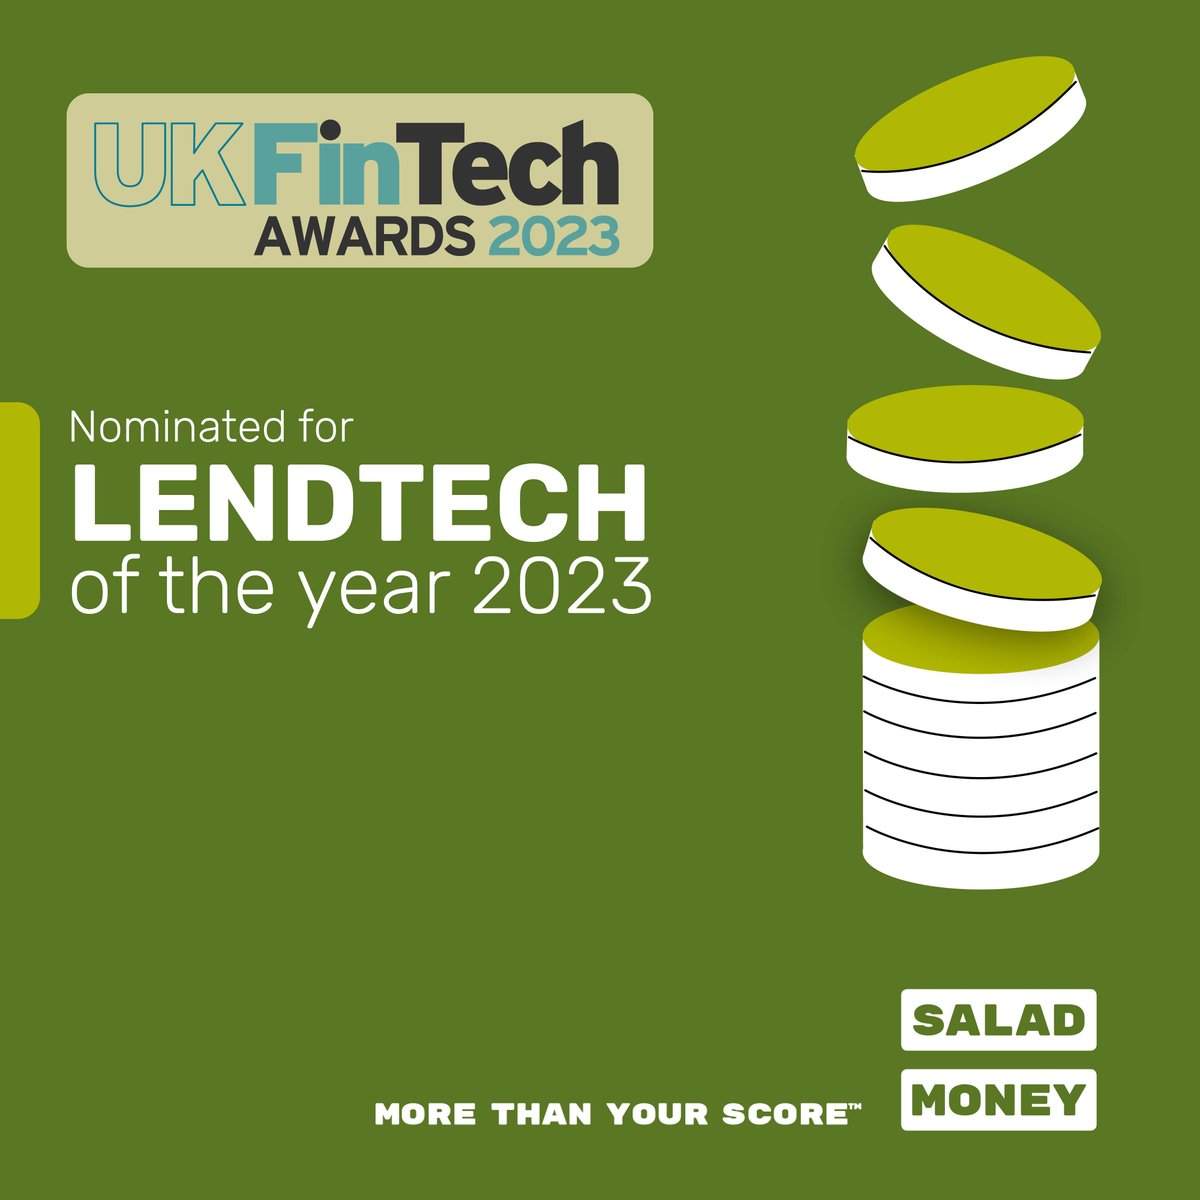 We're pleased to announce we've been nominated for LendTech of the year at the @fintech_uk Awards 2023 #NHS #OpenBanking #PublicSector #Finance #Fintech #Lending